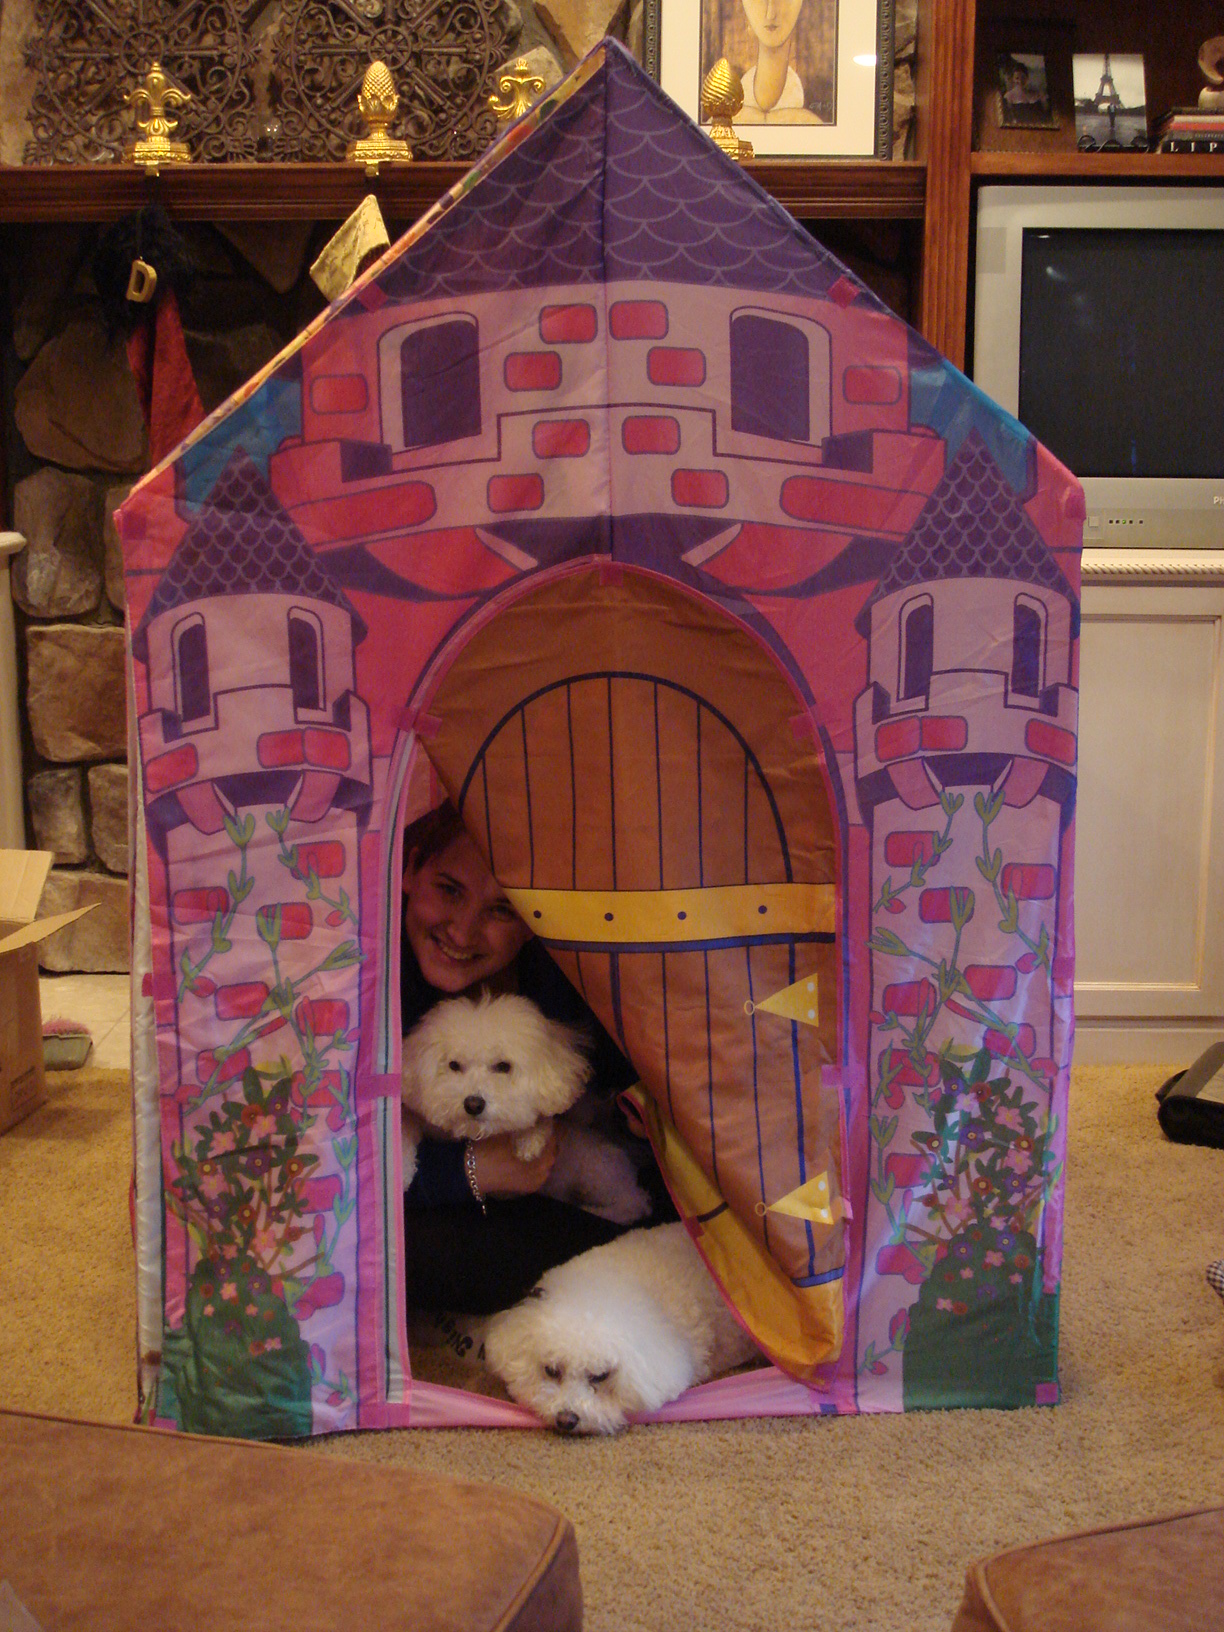 Me and my puppies, Leo and Bella, hanging out in the princess fort!